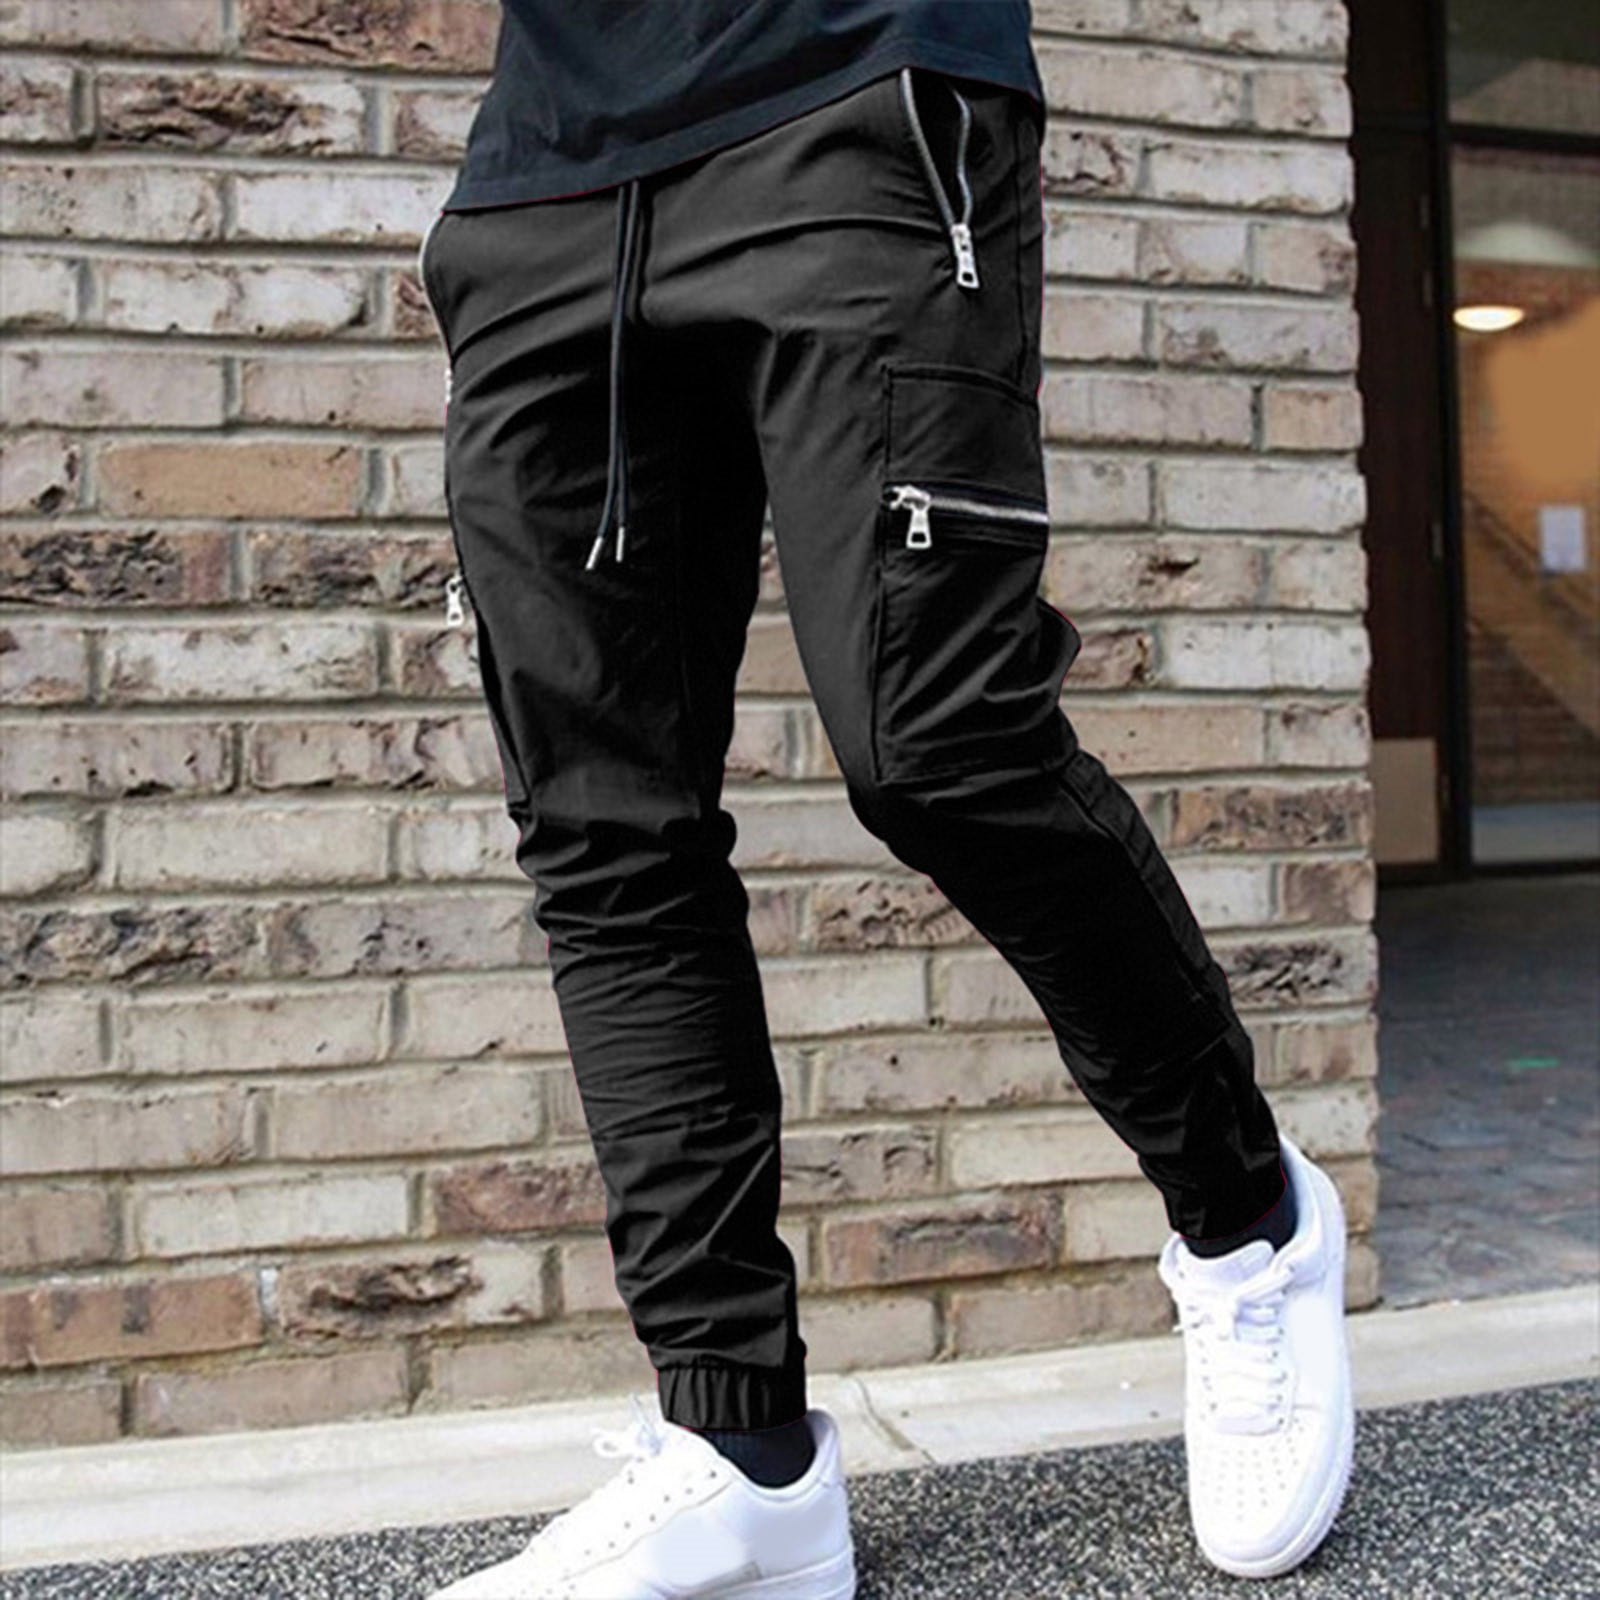 Black Sweatpants For Men Mens Spring And Fashion Autumn Cotton Simple Solid  Color Leisure High Street Elastic Lace Up Pants Trousers Pants 